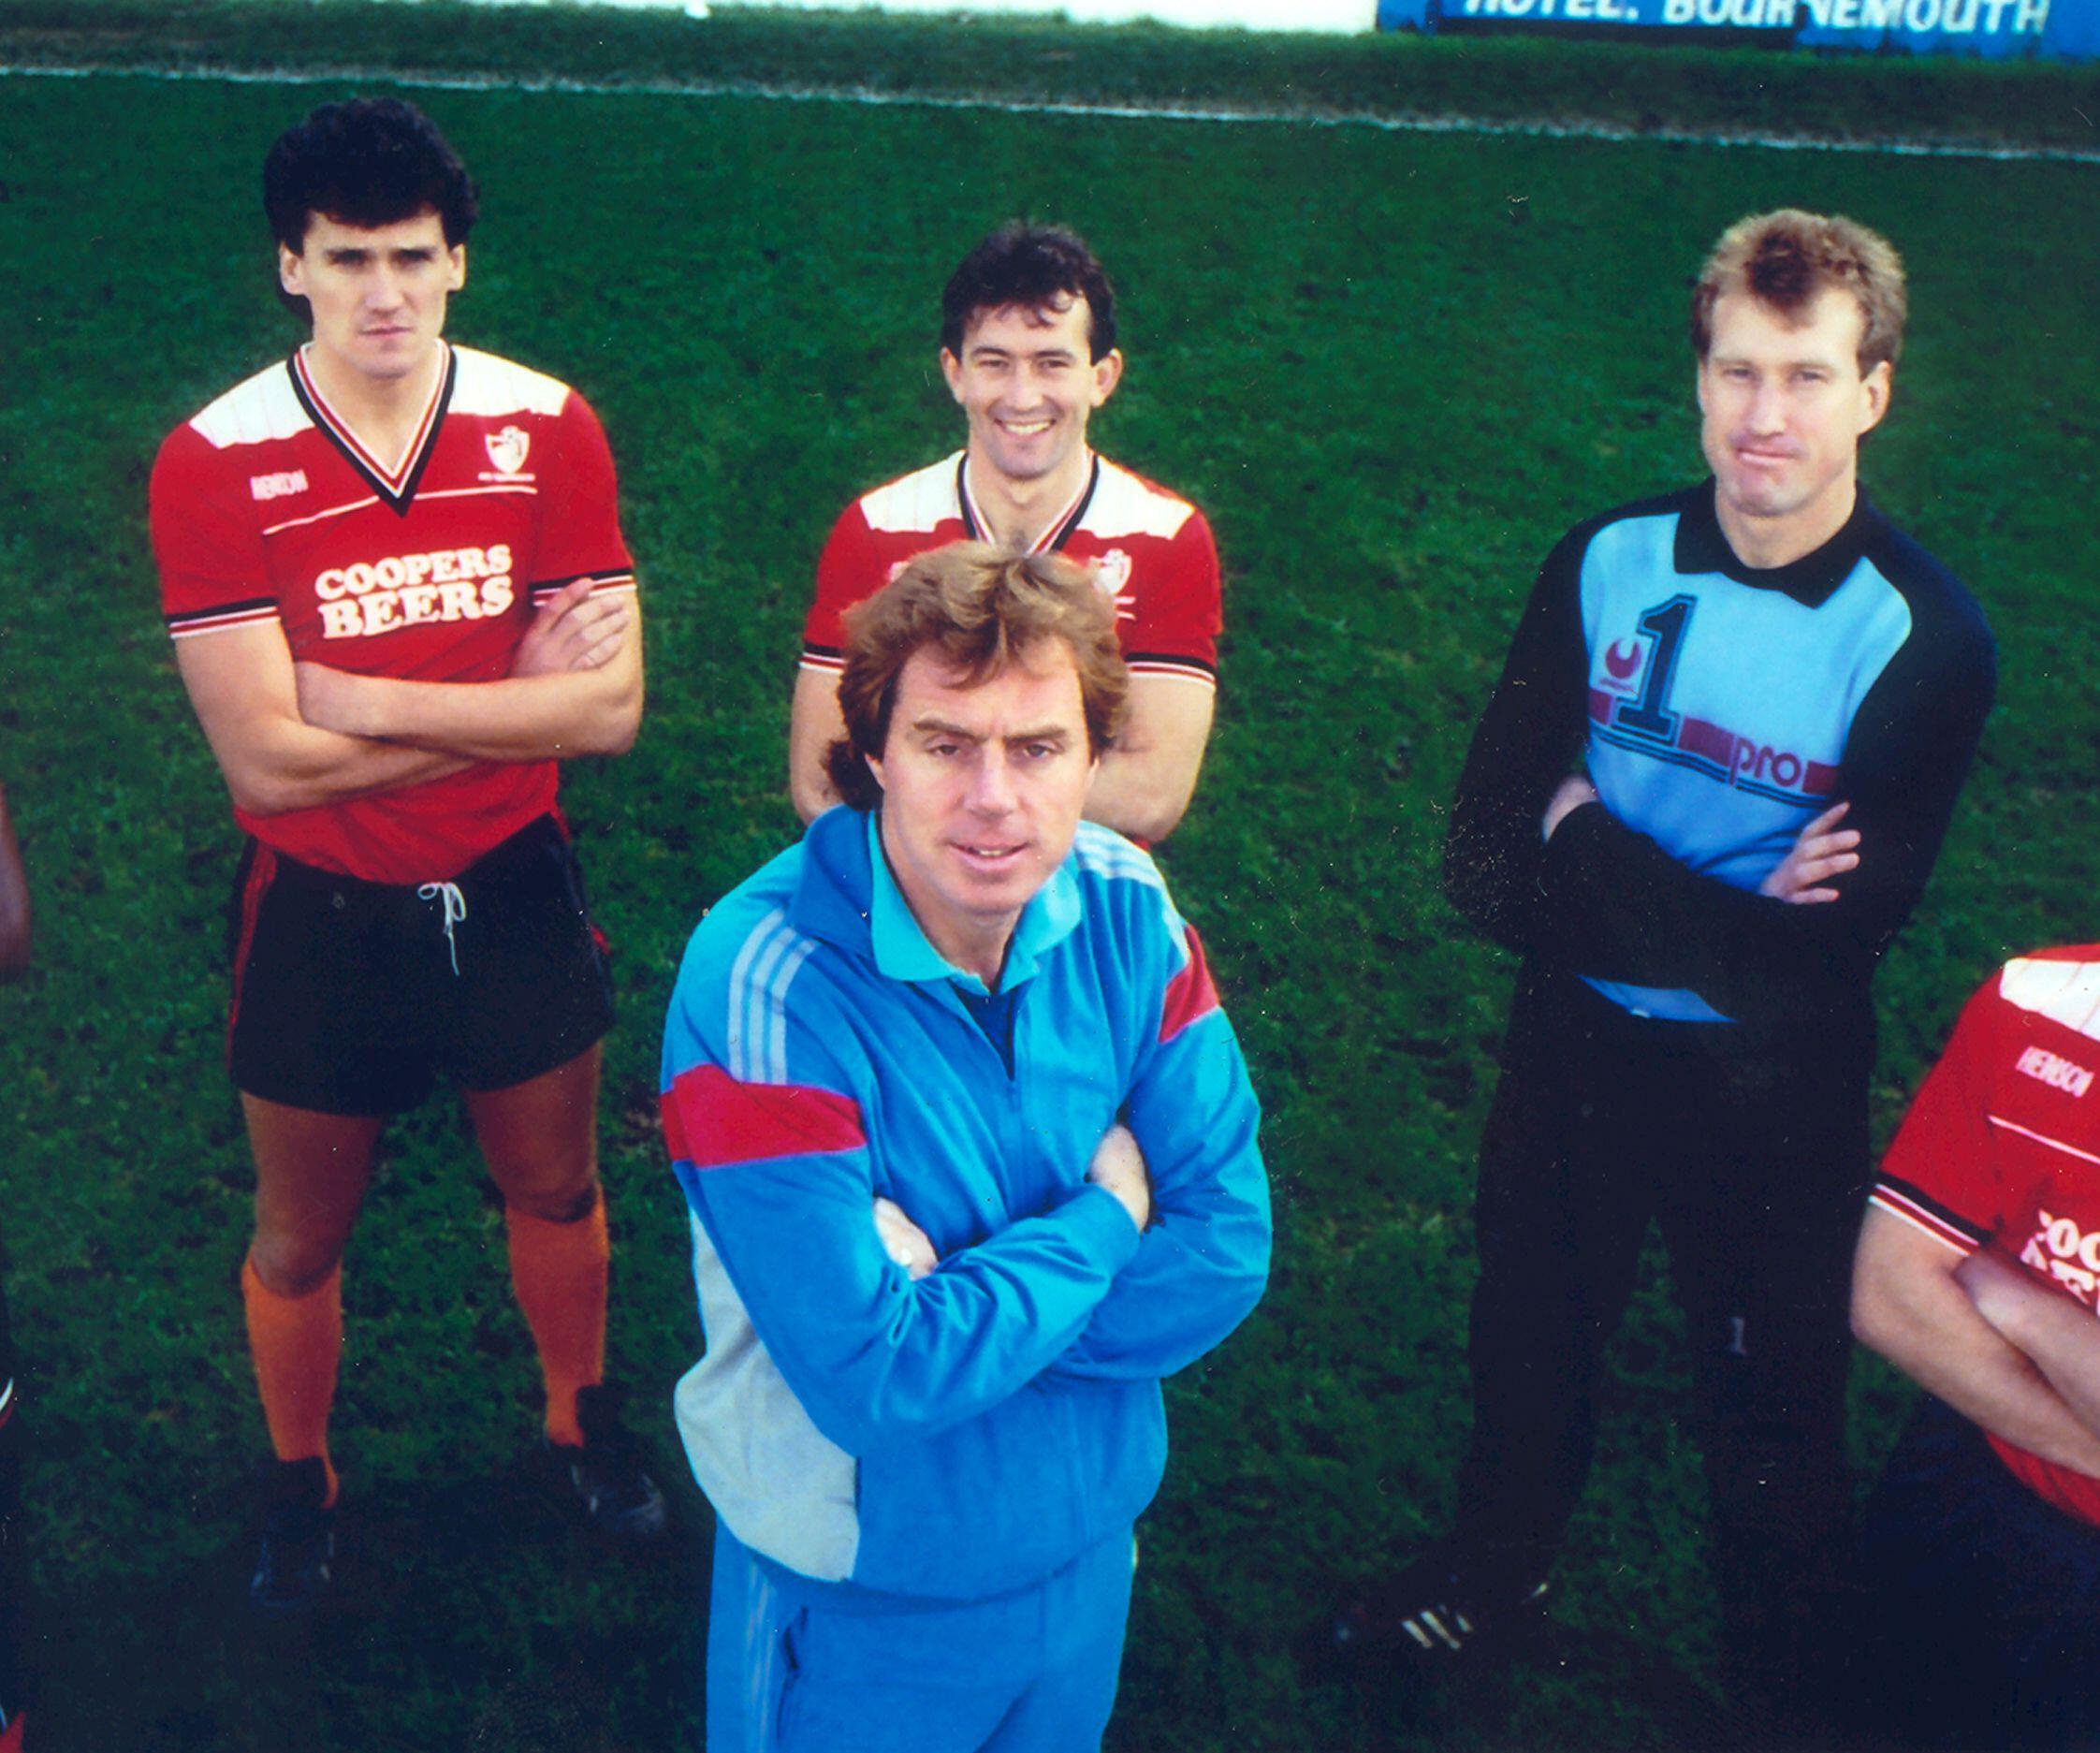 Harry Redknapp (centre) managed Bournemouth between 1983 and 1992. (Mike Walker/Alamy)